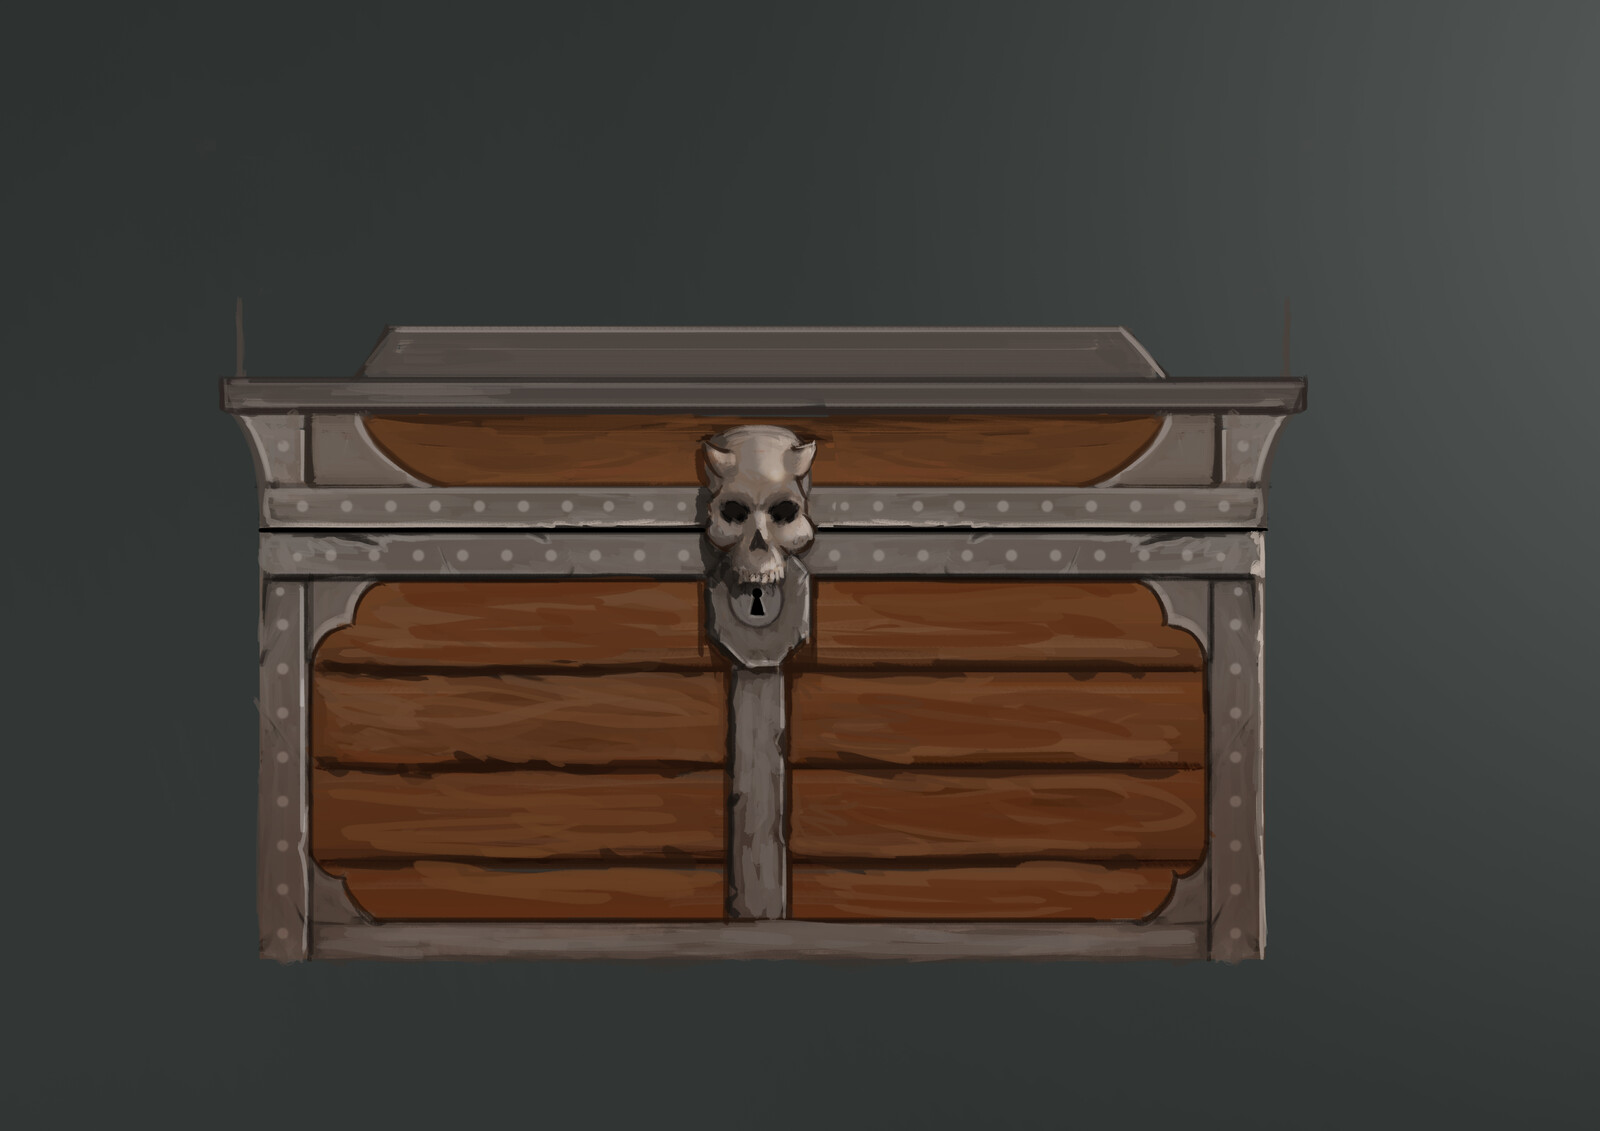 Concept art for Chest 2